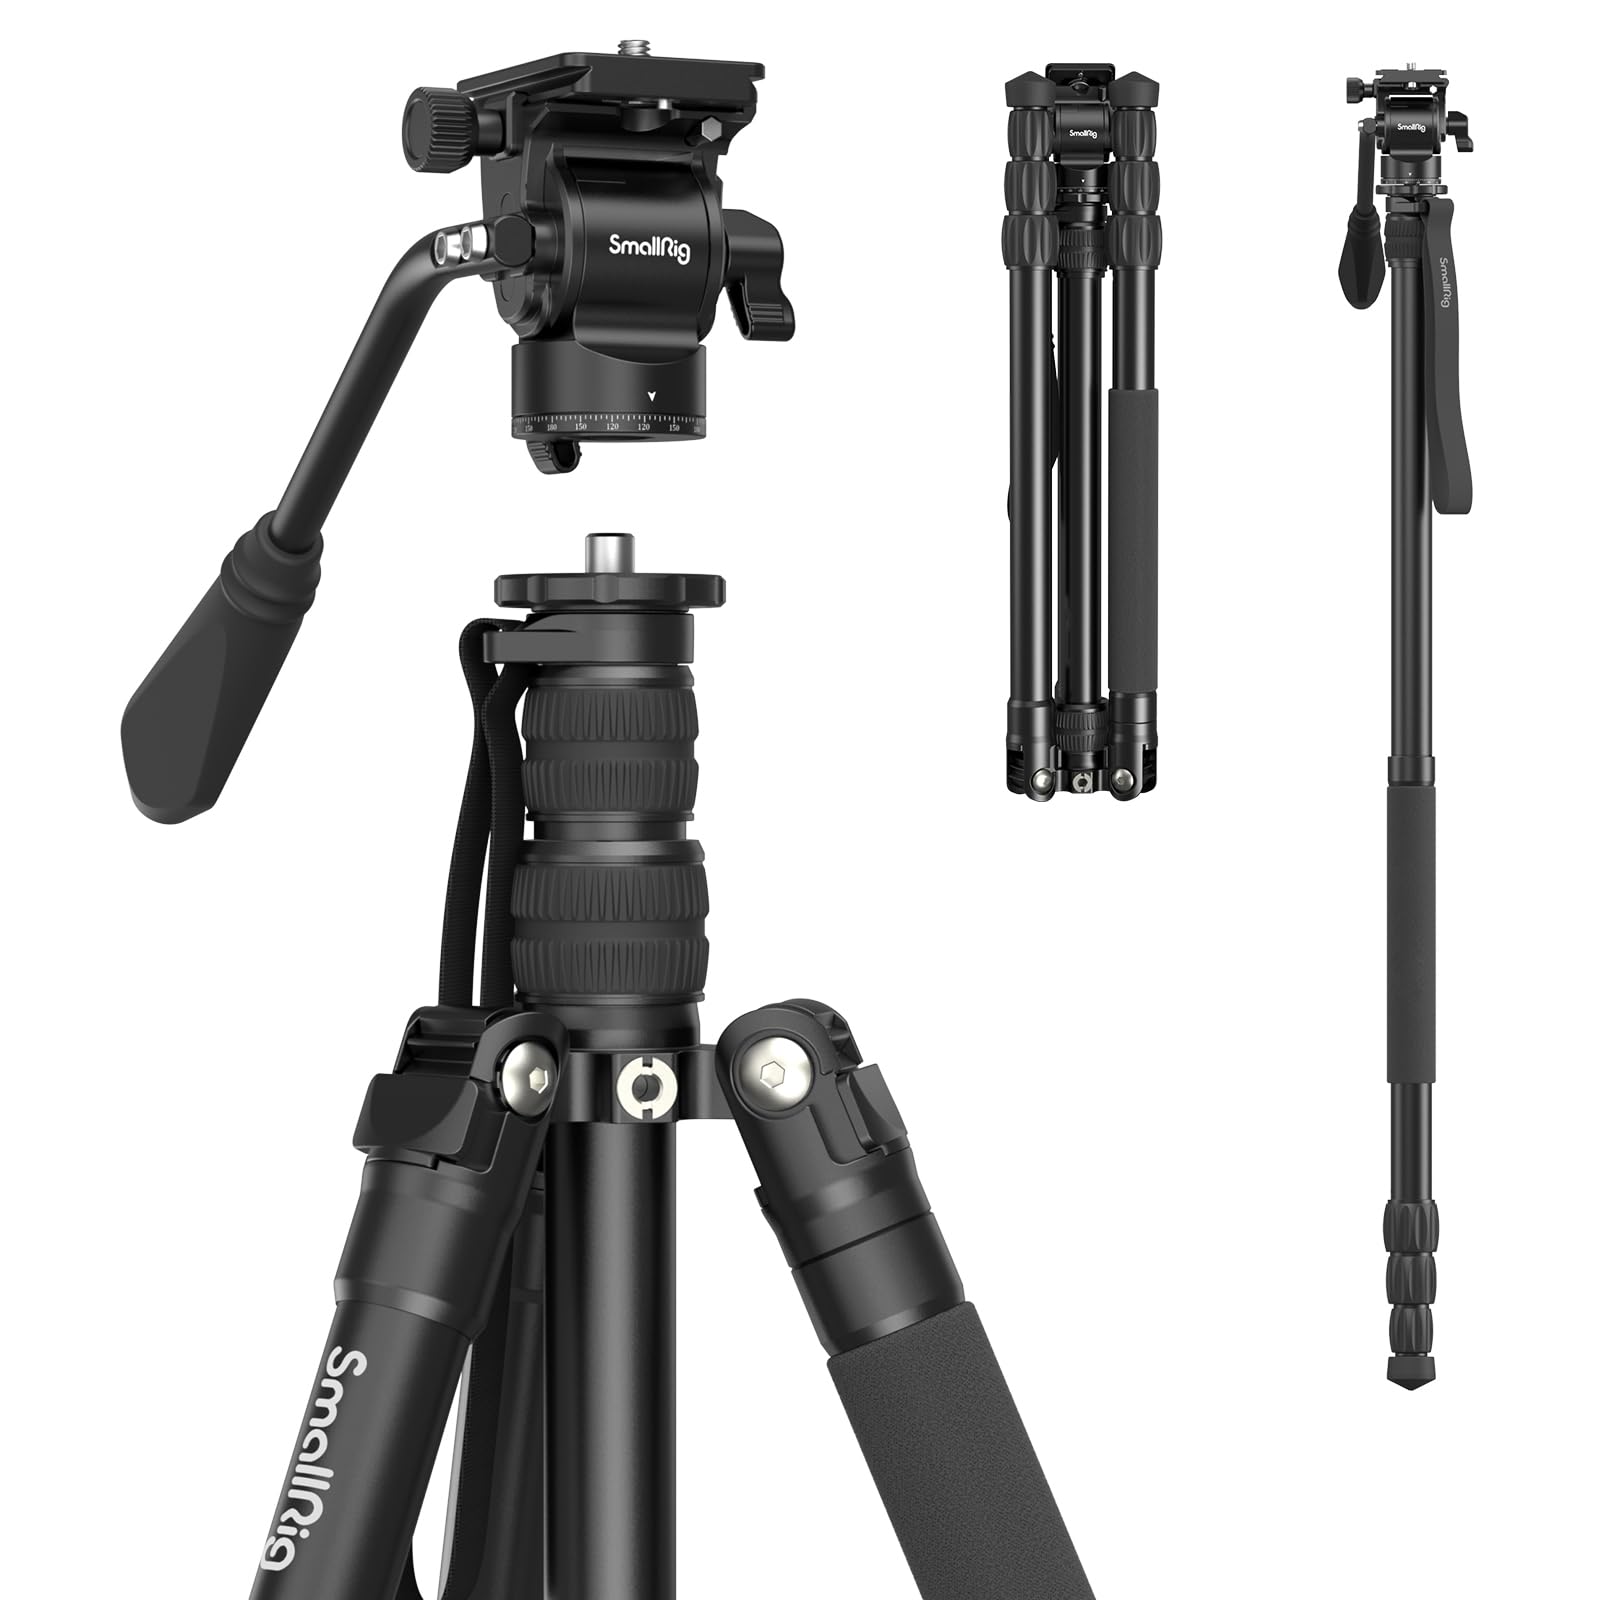 Step-by-Step Guide To Assembling A Monopod And Tripod